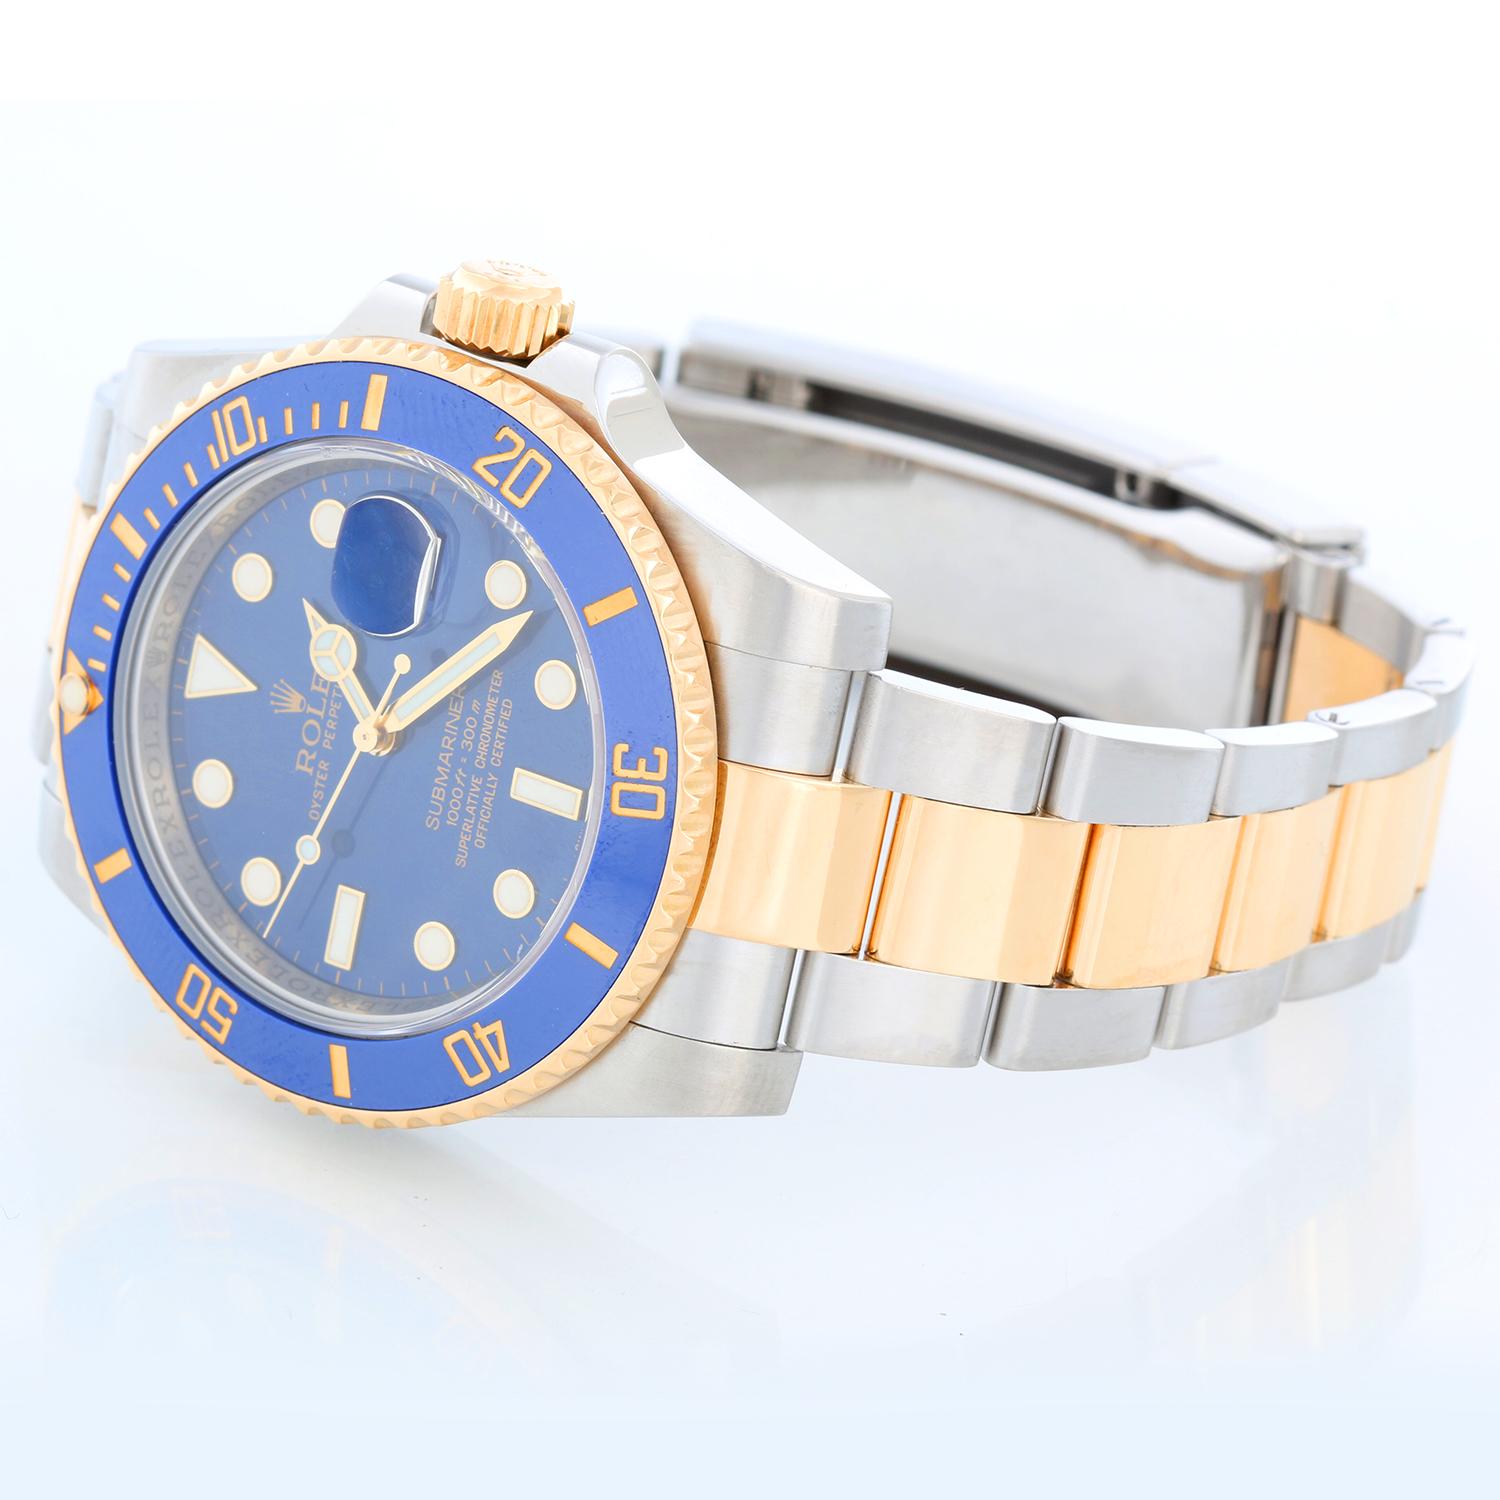 Rolex Submariner 2-Tone Steel & Gold Men's Watch 116613 - Automatic winding, 31 jewels, pressure proof to 1,000 feet. Stainless steel case with 18k yellow gold bezel  (40mm diameter). Blue  dial with luminous markers; date at 3 o'clock. Two tone